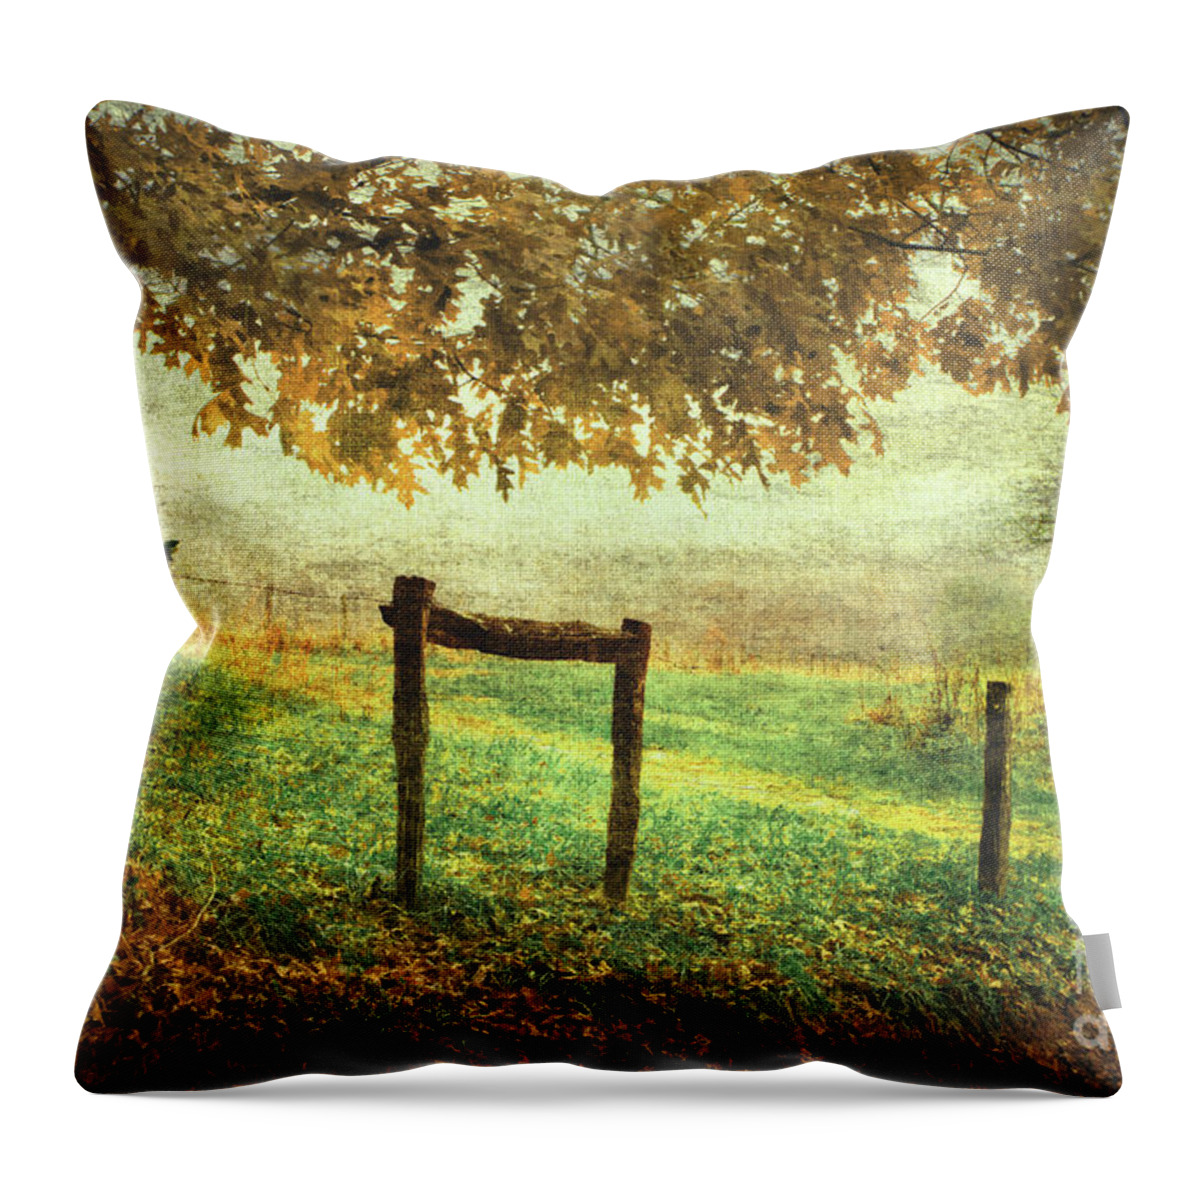 Fence Row Throw Pillow featuring the photograph Seasons Ending by Michael Eingle